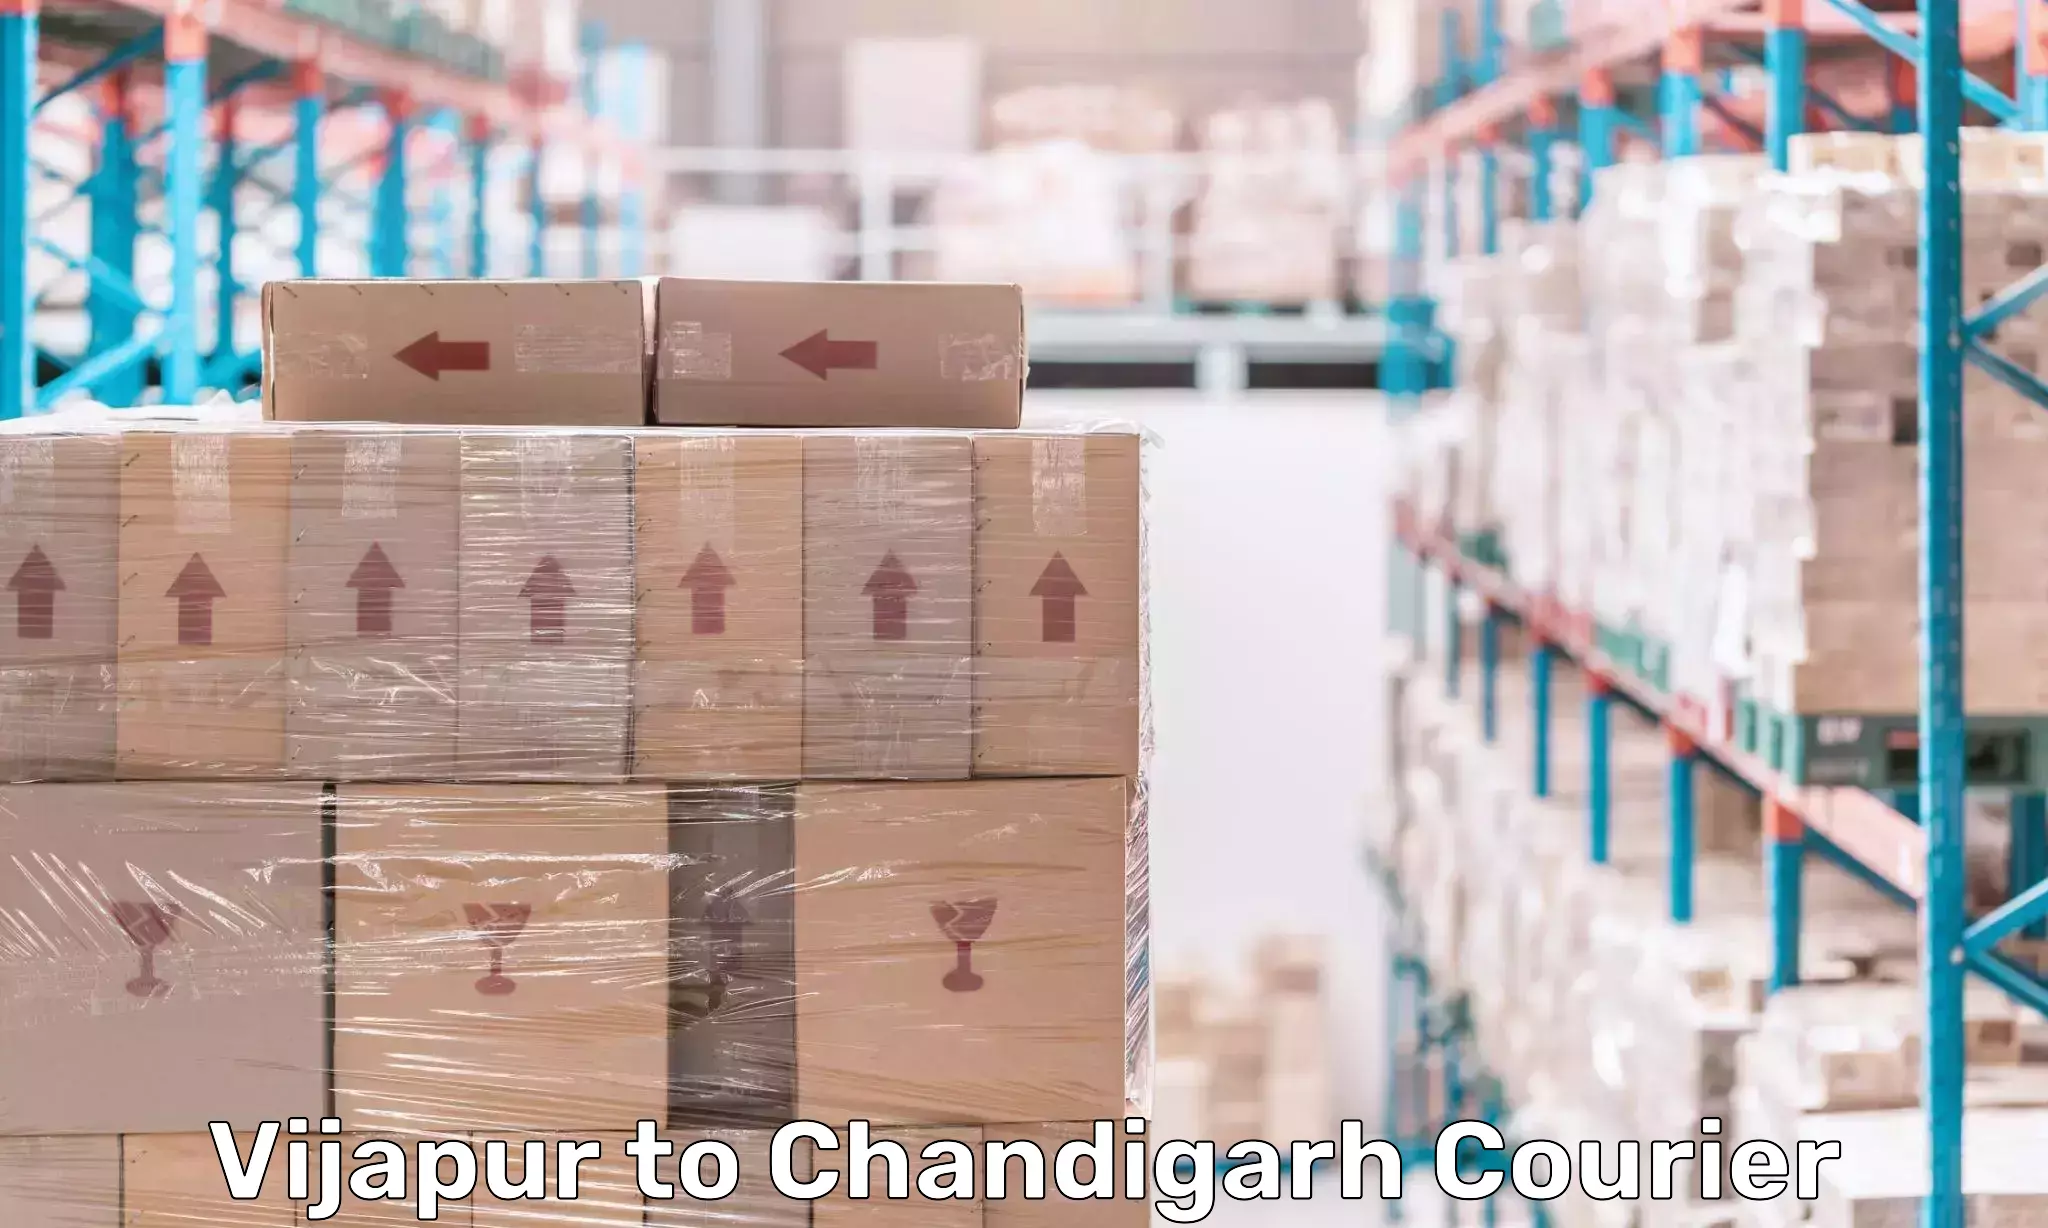 Package delivery network Vijapur to Chandigarh